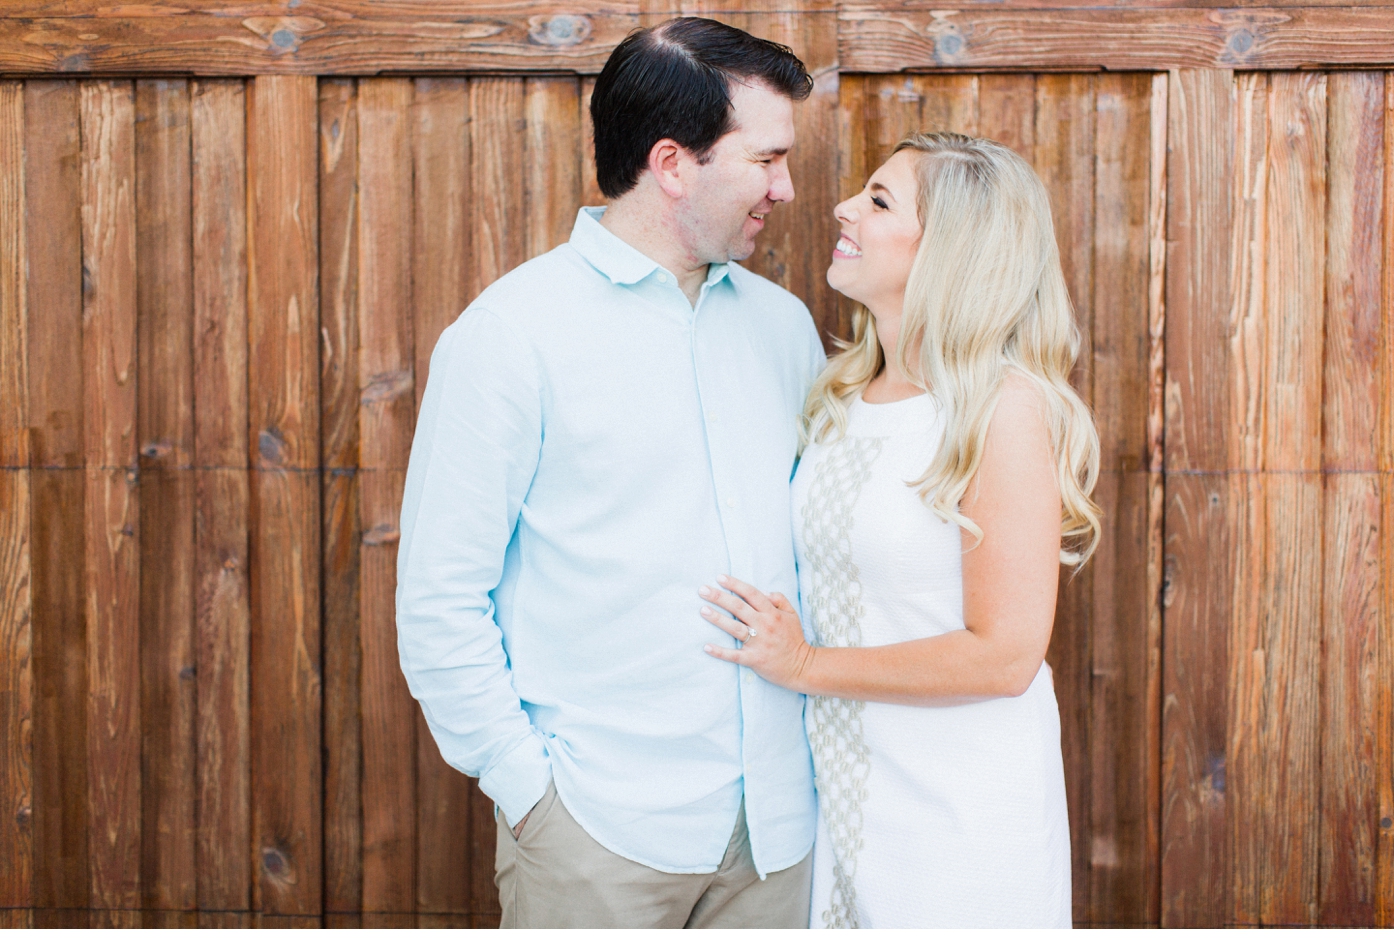 Virginia Beach Oceanfront Engagement Session by Alisandra Photography